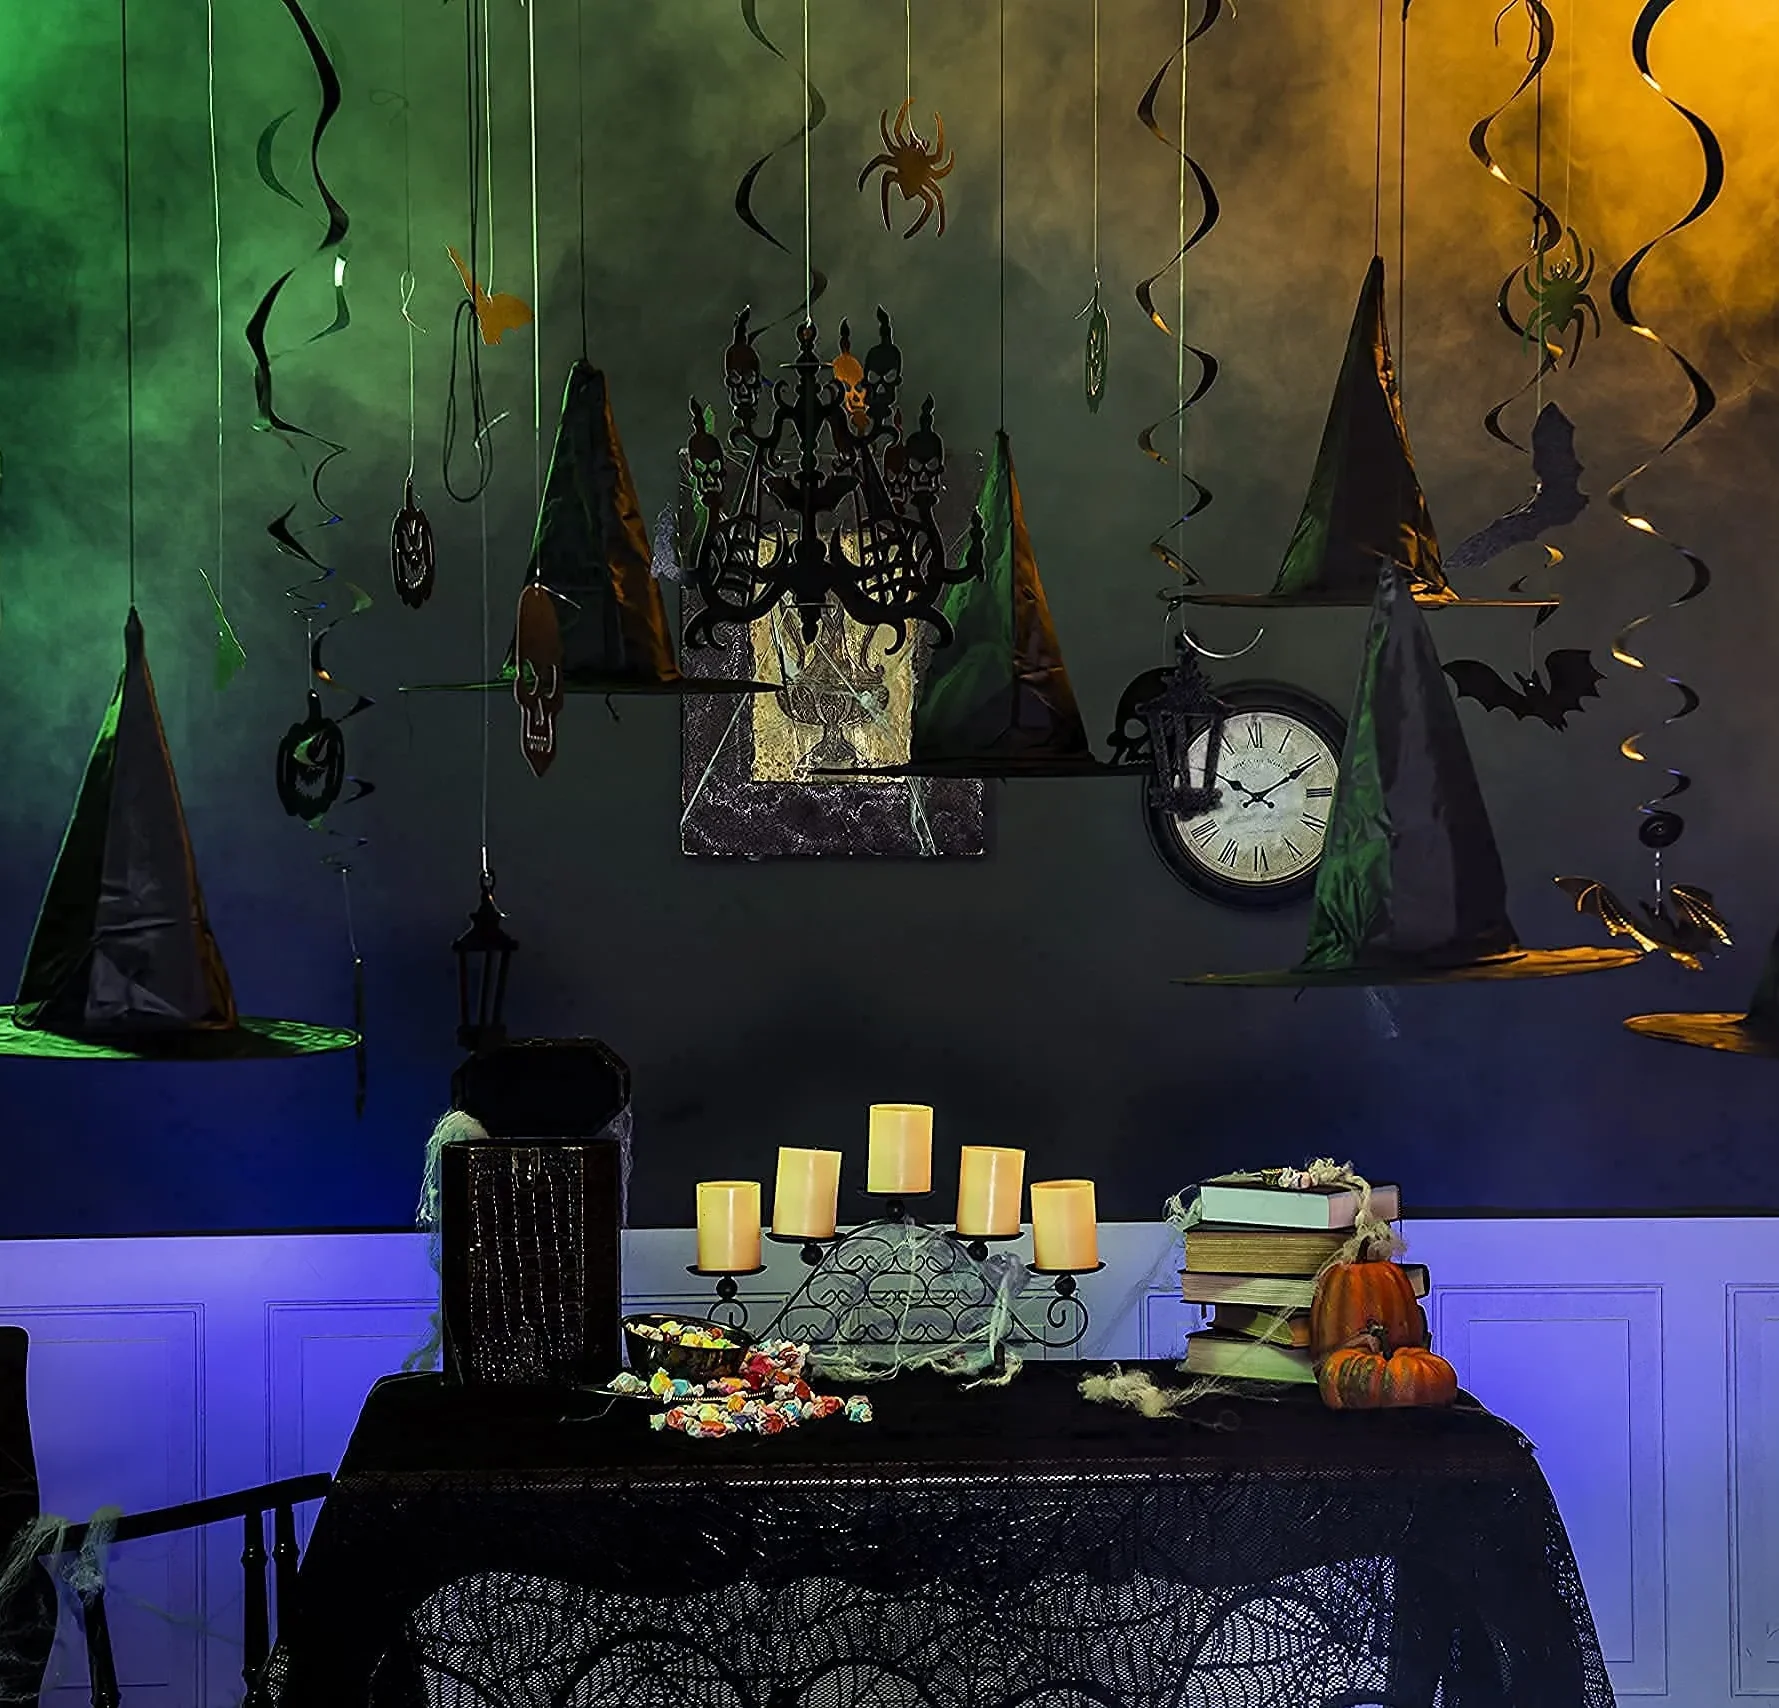 You are currently viewing Decorating for Halloween with Hanging Witch Hats